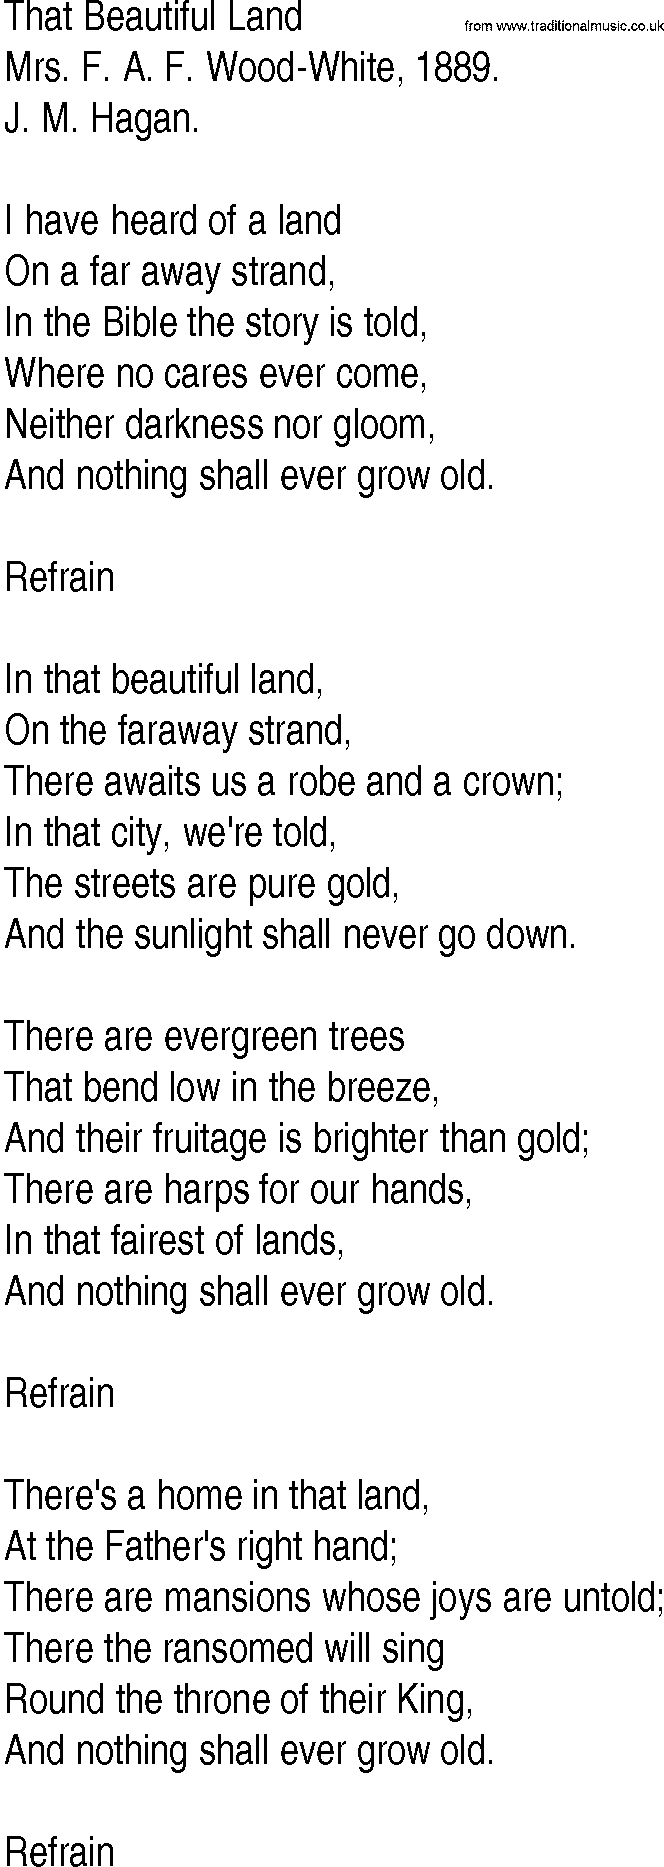 Hymn and Gospel Song: That Beautiful Land by Mrs F A F WoodWhite lyrics